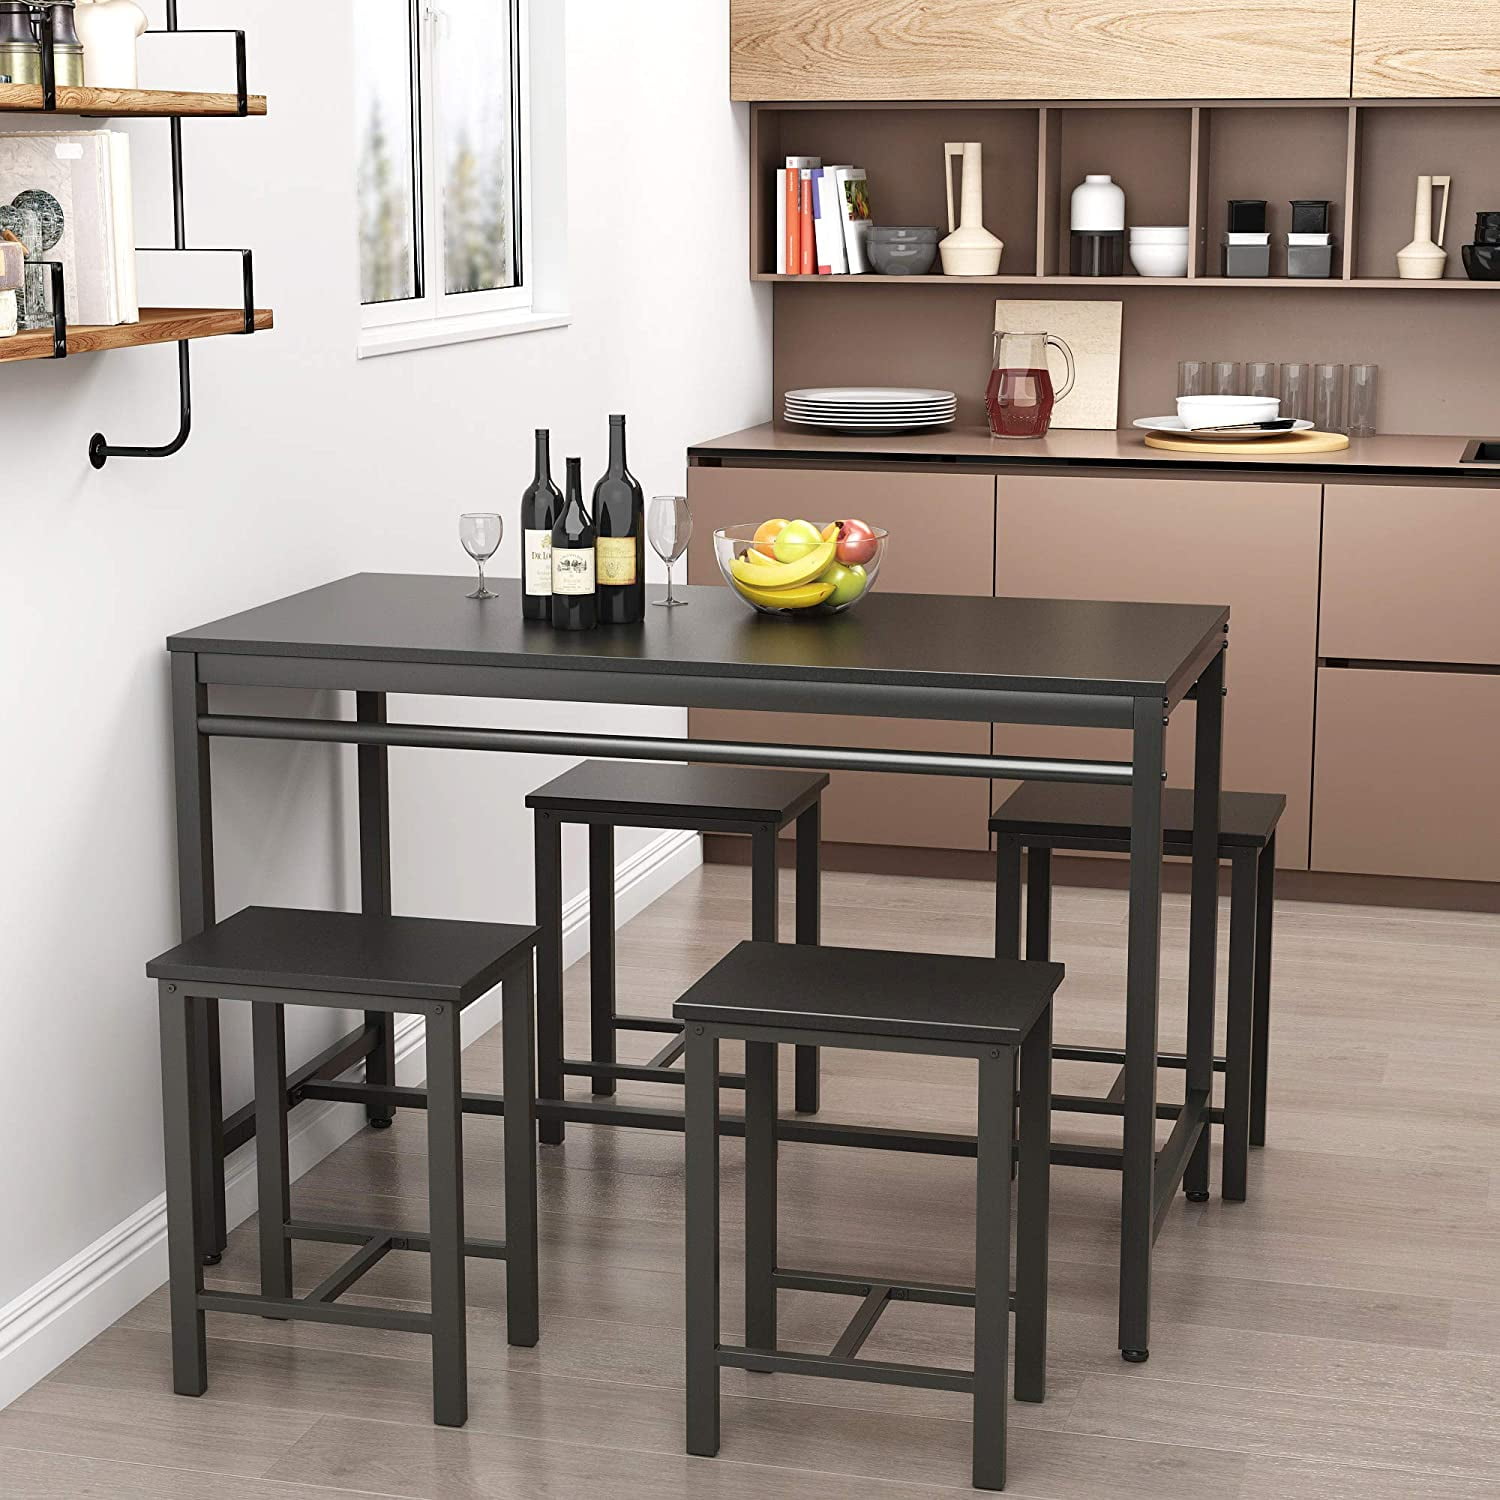  small kitchen table with bar stools